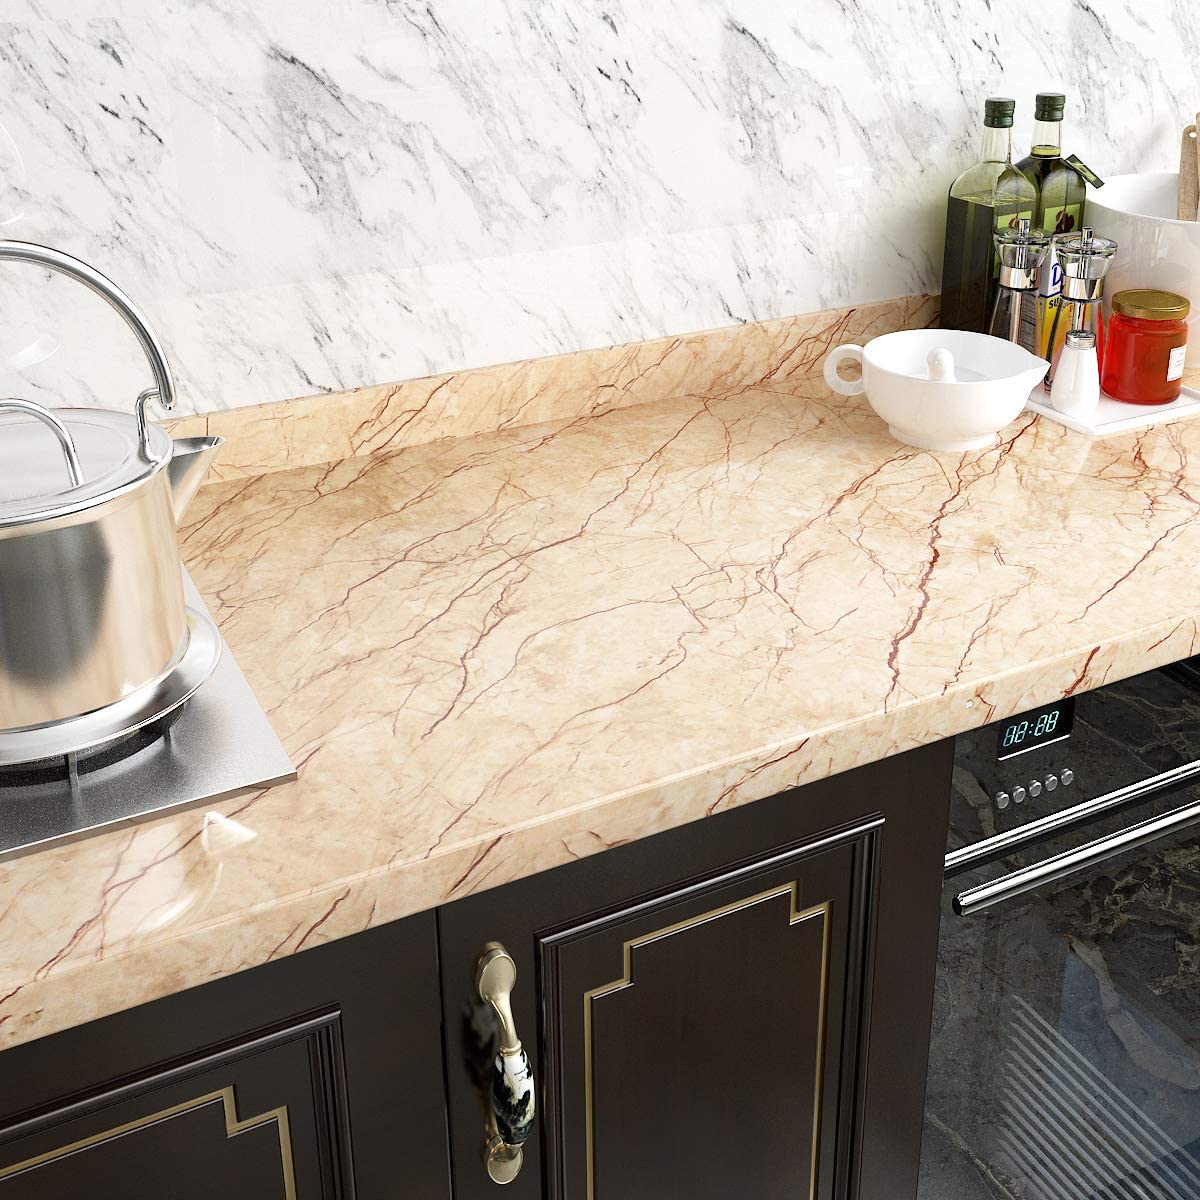 How To Cover Countertops With Contact Paper